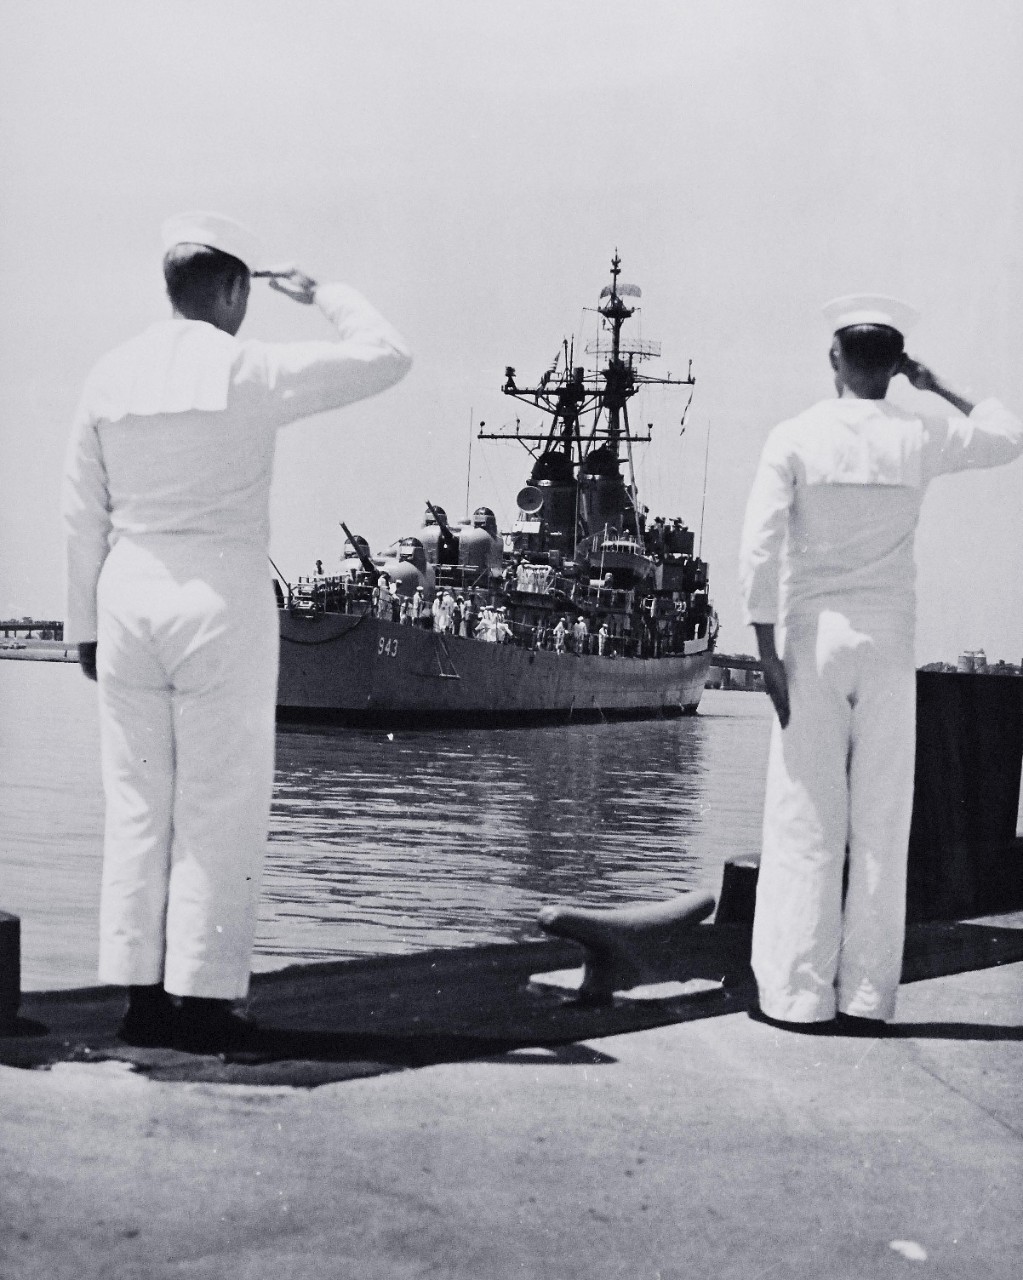 330-PS-8986 (111-SC-536401):    Unknown Servicemen of WWII and Korean War arrival at Washington Navy Yard, 1958.    Two U.S. Navy Sailors salute as USS Blandy (DD-943) arrives at the U.S. Naval Gun Factory (now Washington Navy Yard), Washington, D.C., with the remains of the Unknown Servicemen of World War II and the Korean War, May 27, 1958.  Official U.S. Army Photograph, now in the joint DOD Photograph Collection at the National Archives.   